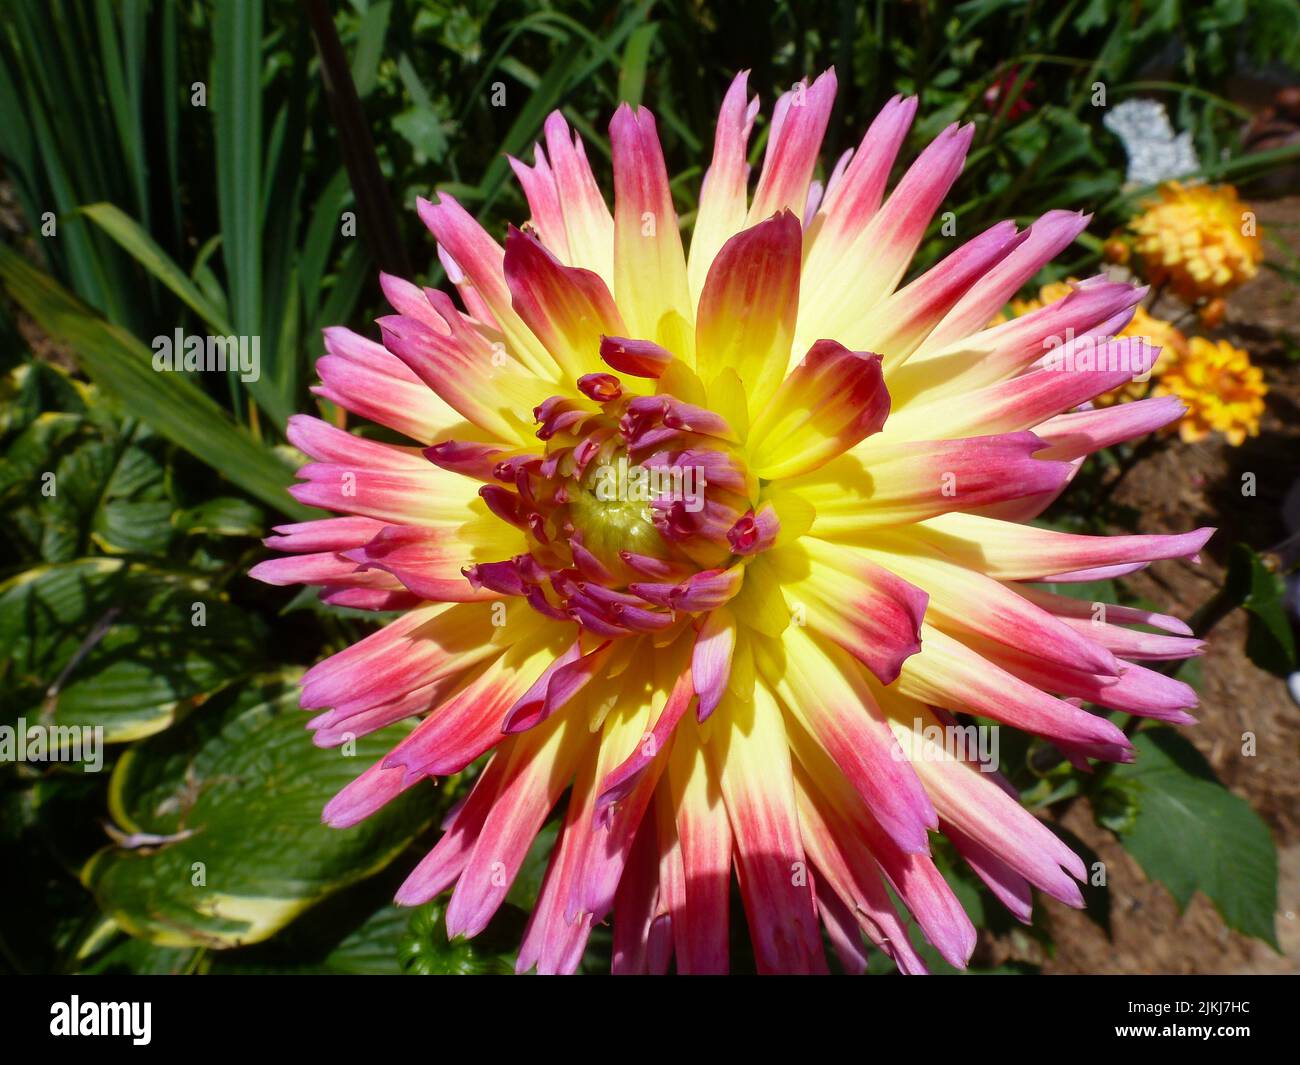 A closeup of a yellow 'Cactus' Dahlia with pink edges against green leaves in sunlight Stock Photo